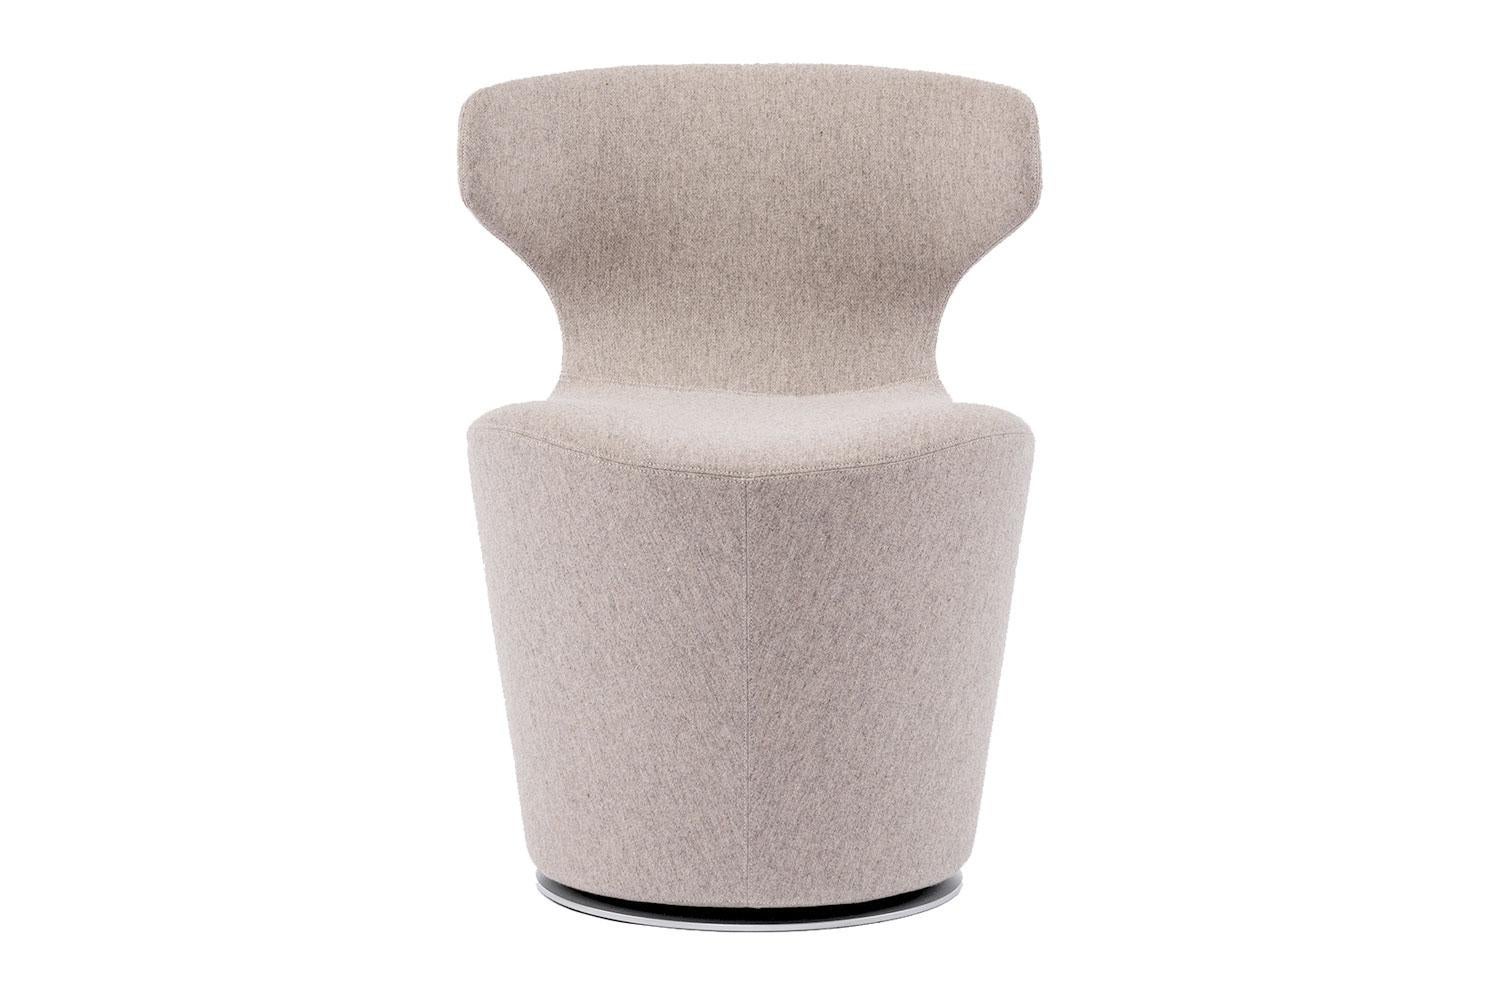 The Mini Papilio Armchair by B&B Italia is covered in a neutral warm beige wool-cashmere blend with zipper detail down the back. This armchair is suited for both residential homes and public or corporate spaces. It echoes the characteristics of the